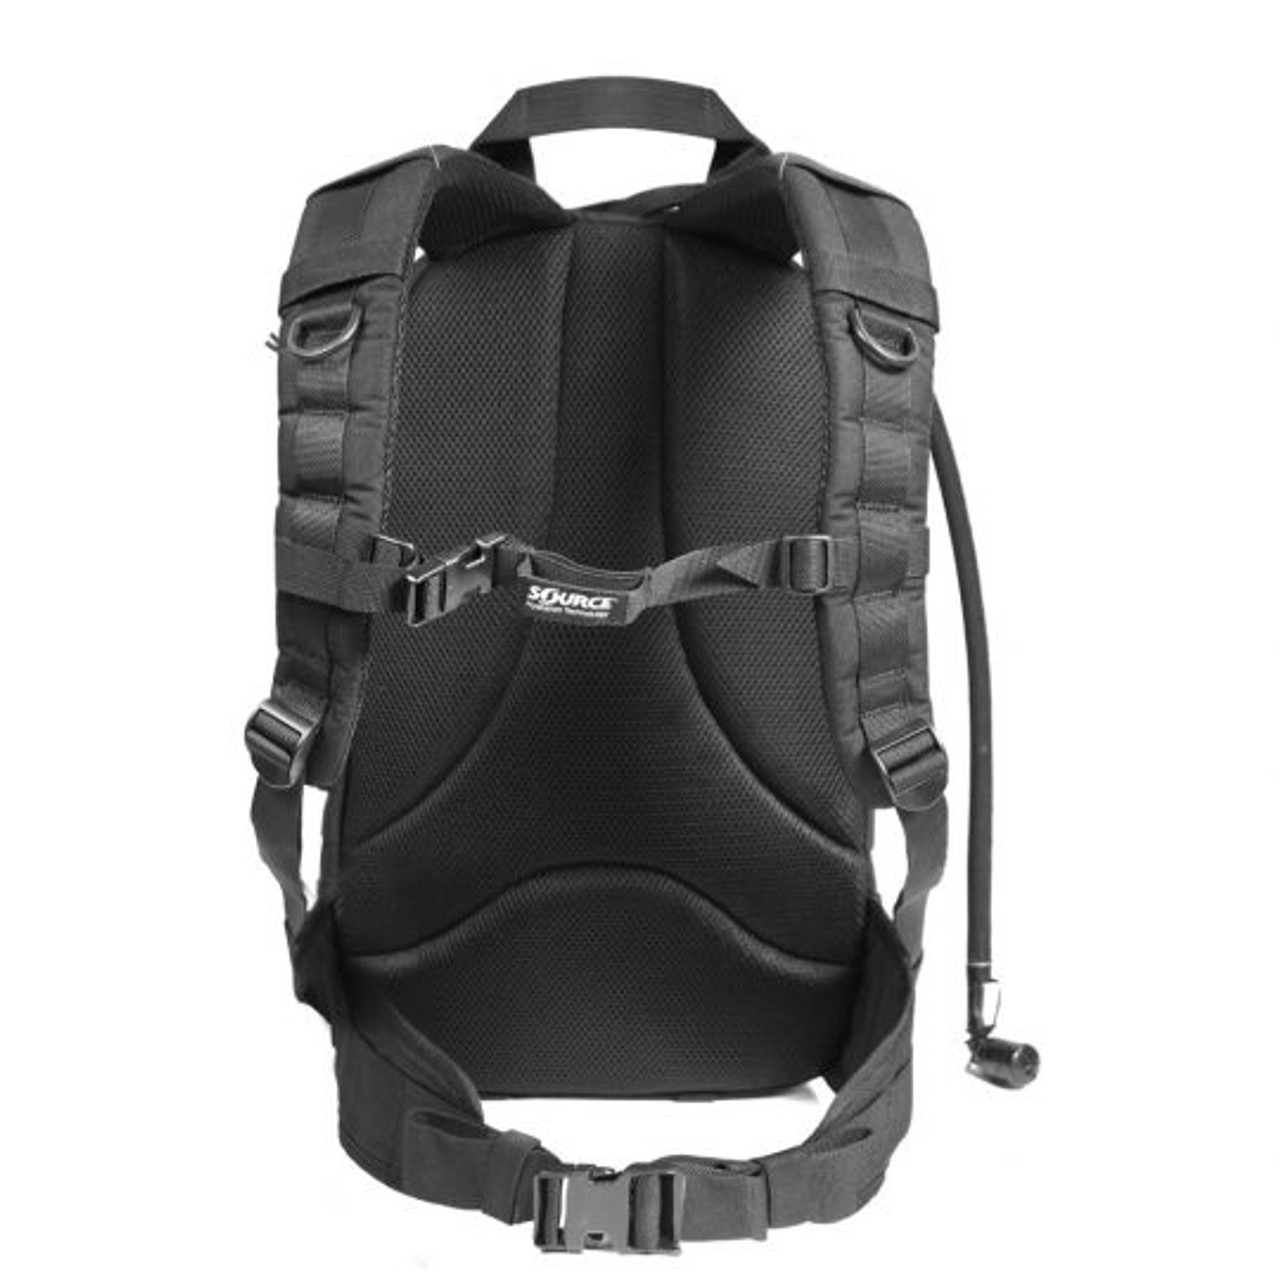 Black Assault 20L By Source Tactical Gear | Military Luggage